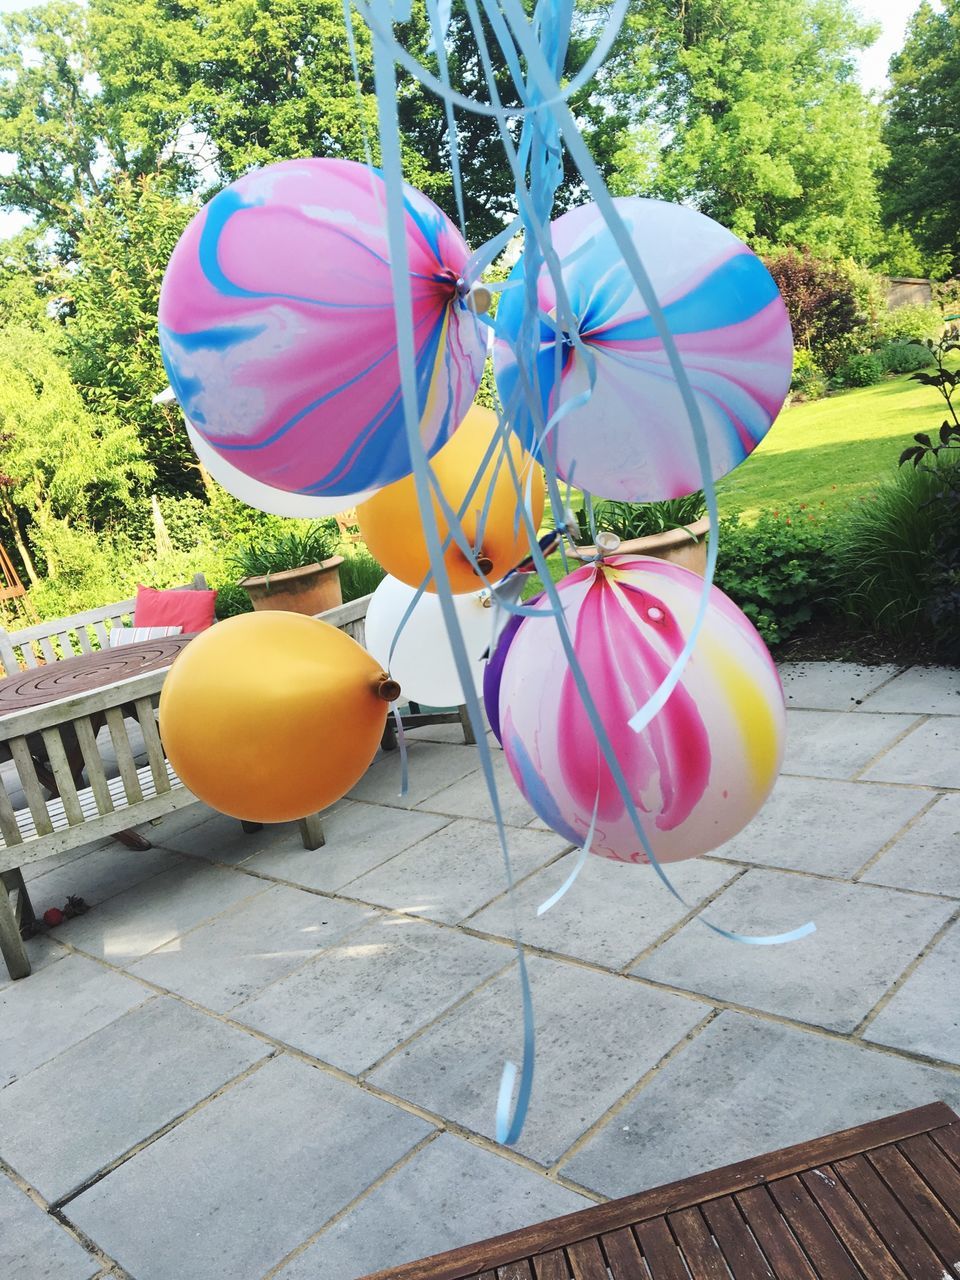 multi colored, hanging, sunlight, decoration, flower, balloon, outdoors, day, tree, celebration, table, chair, umbrella, high angle view, no people, park - man made space, shadow, front or back yard, pink color, fragility